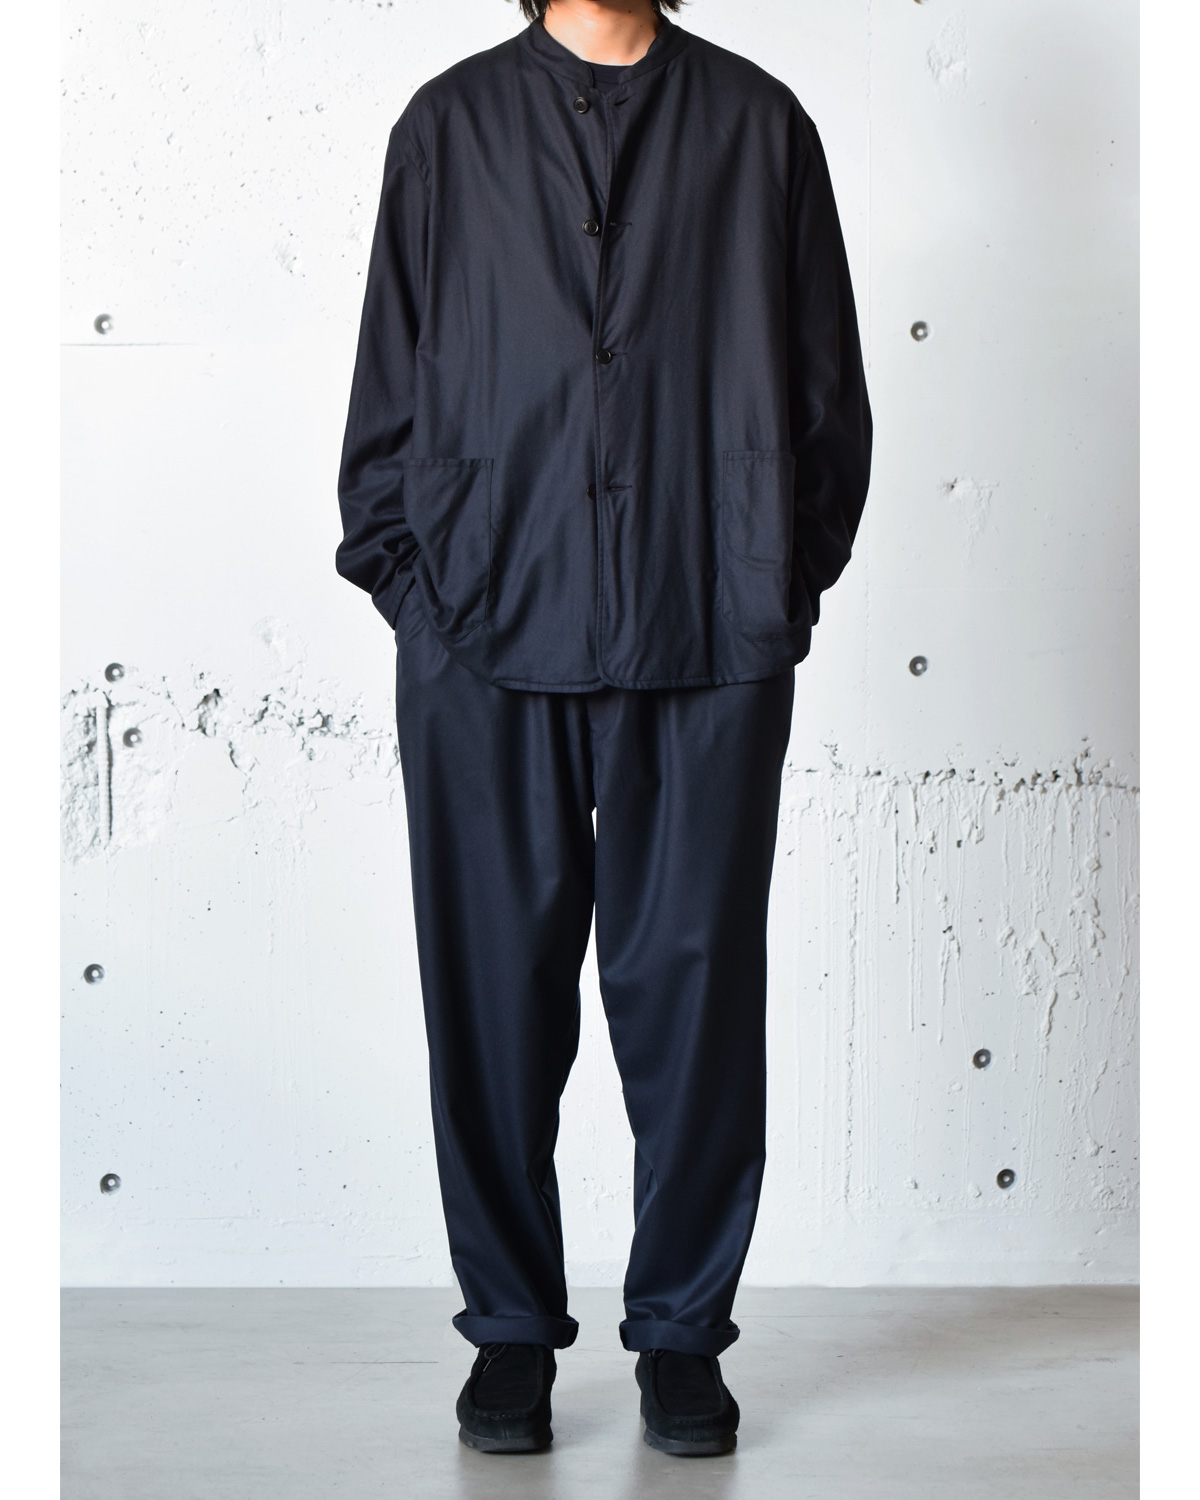 COMOLI “AW21 COLLECTION” -4th DELIVERY- | MAIDENS SHOP ...